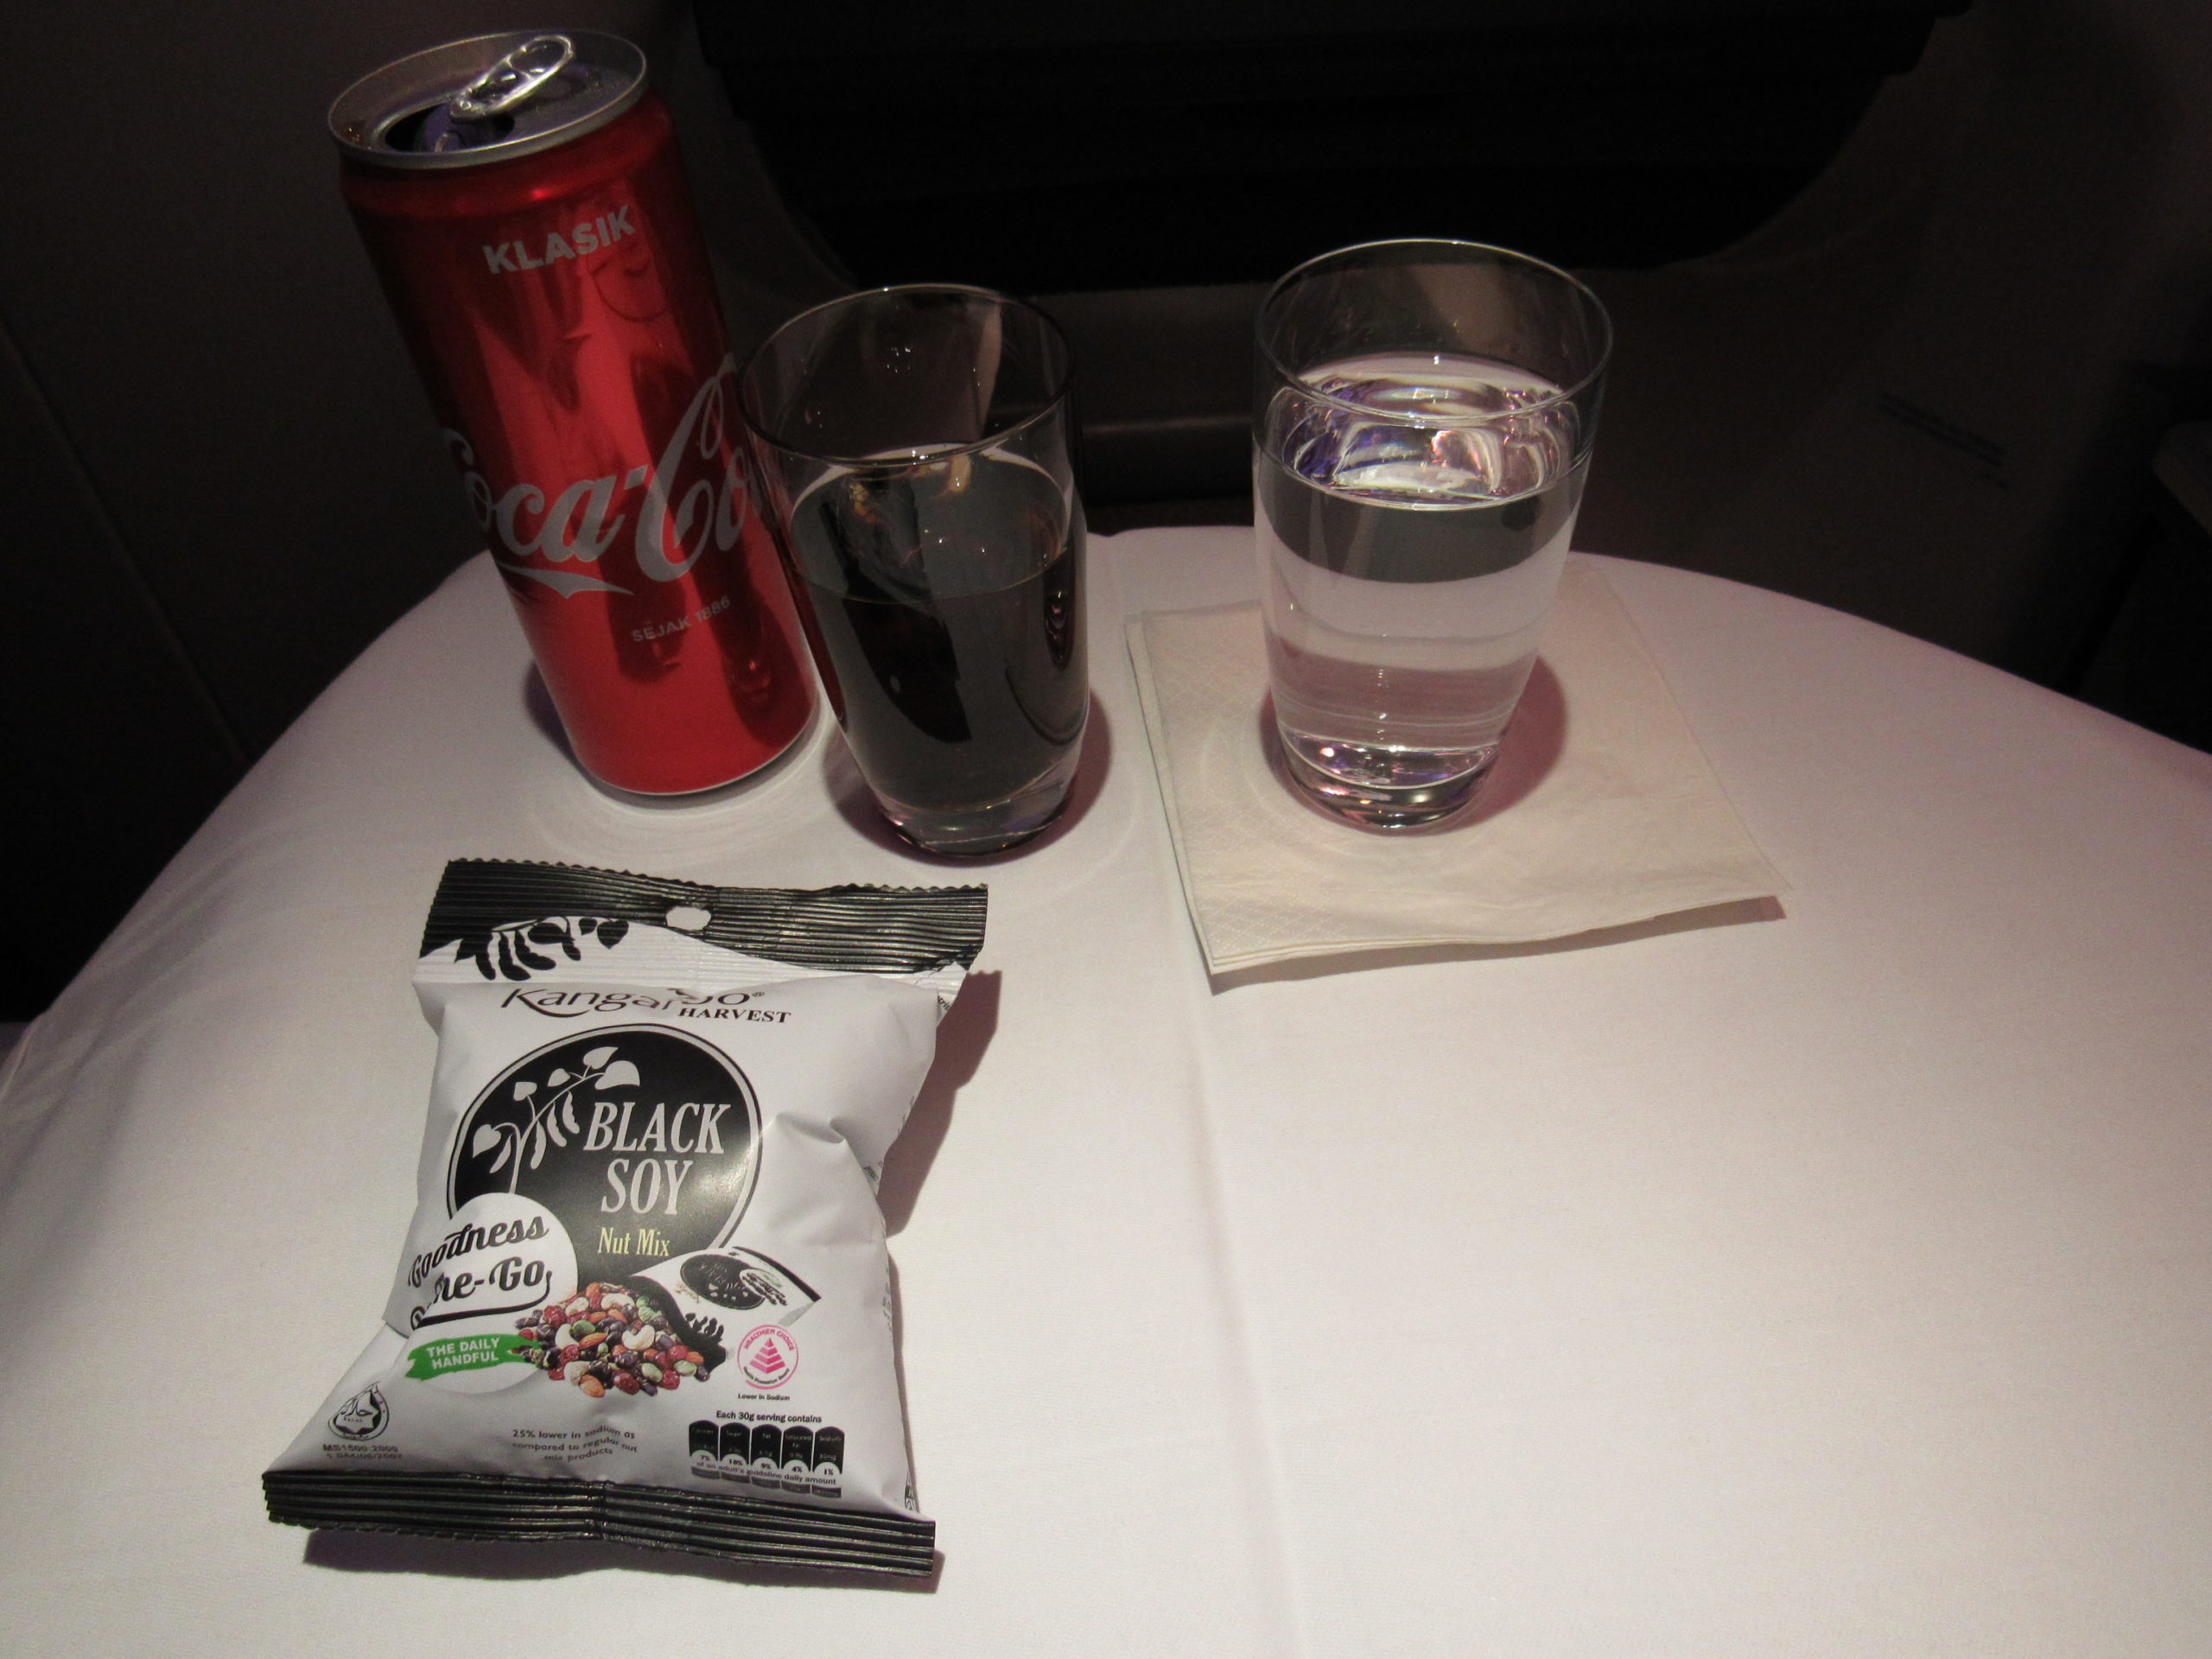 Malaysia Airlines Snack